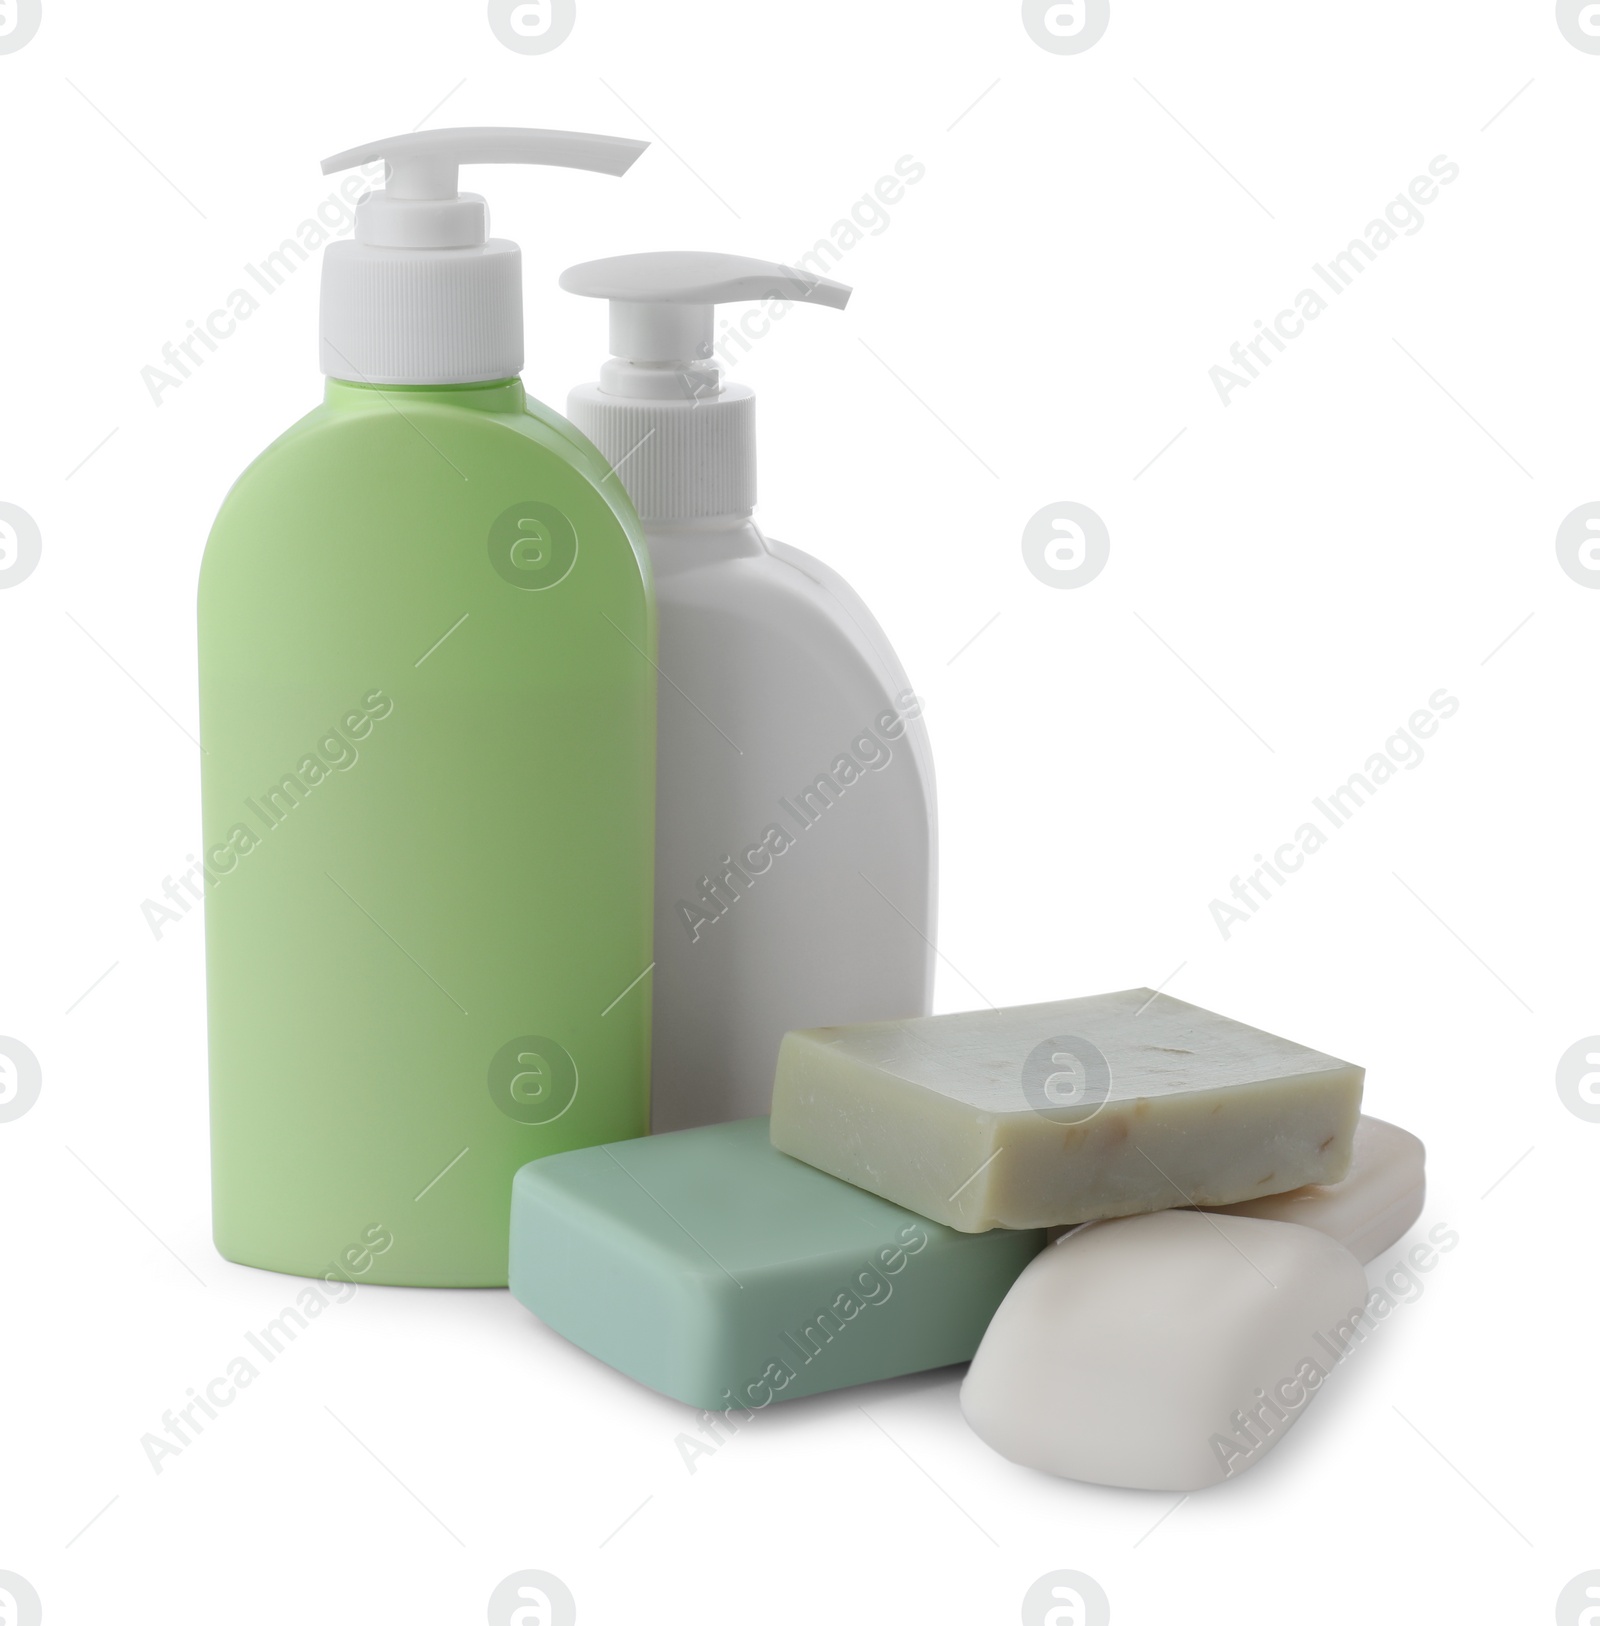 Photo of Soap bars and bottle dispensers on white background